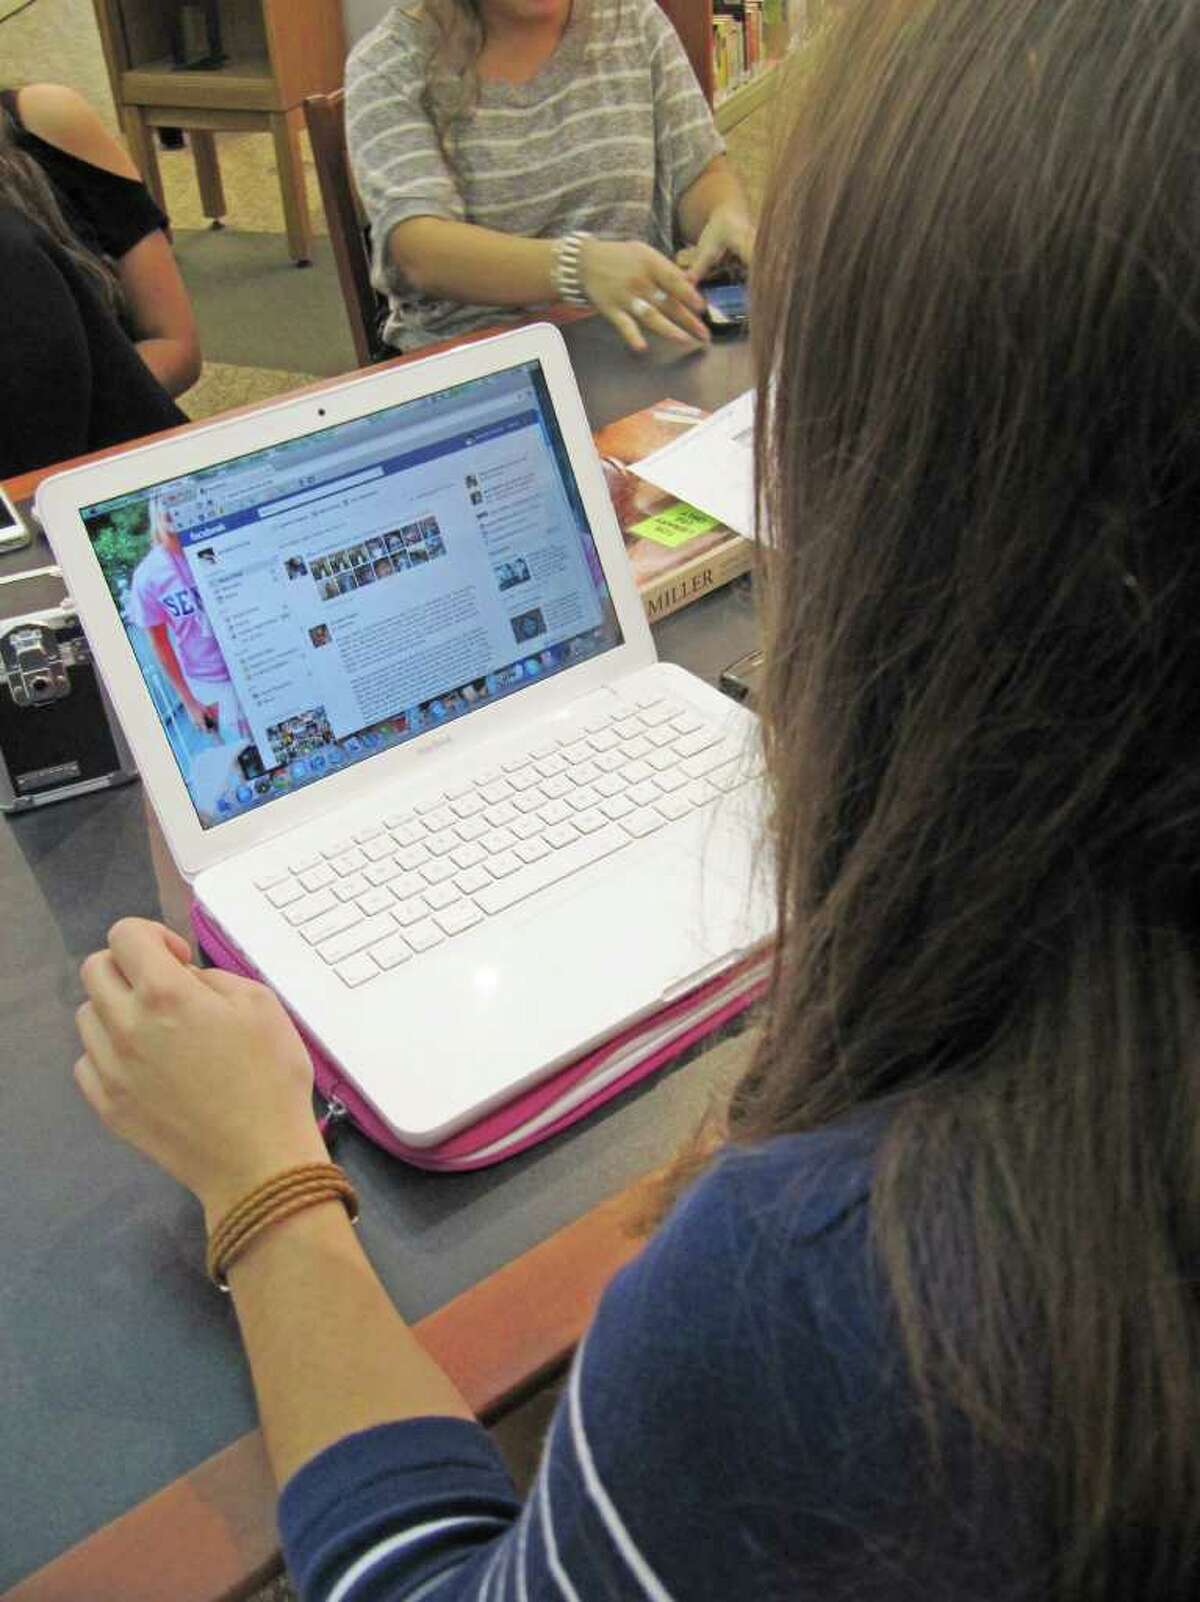 Staples High School senior Amanda Pacilio logs onto Facebook.com while at the school's library Tuesday afternoon. John Dodig, Staples' principal, announced on Aug. 25 he was lifting a nearly five-year ban of the social networking site. In nearby Fairfield, all social networking sites are banned district-wide.